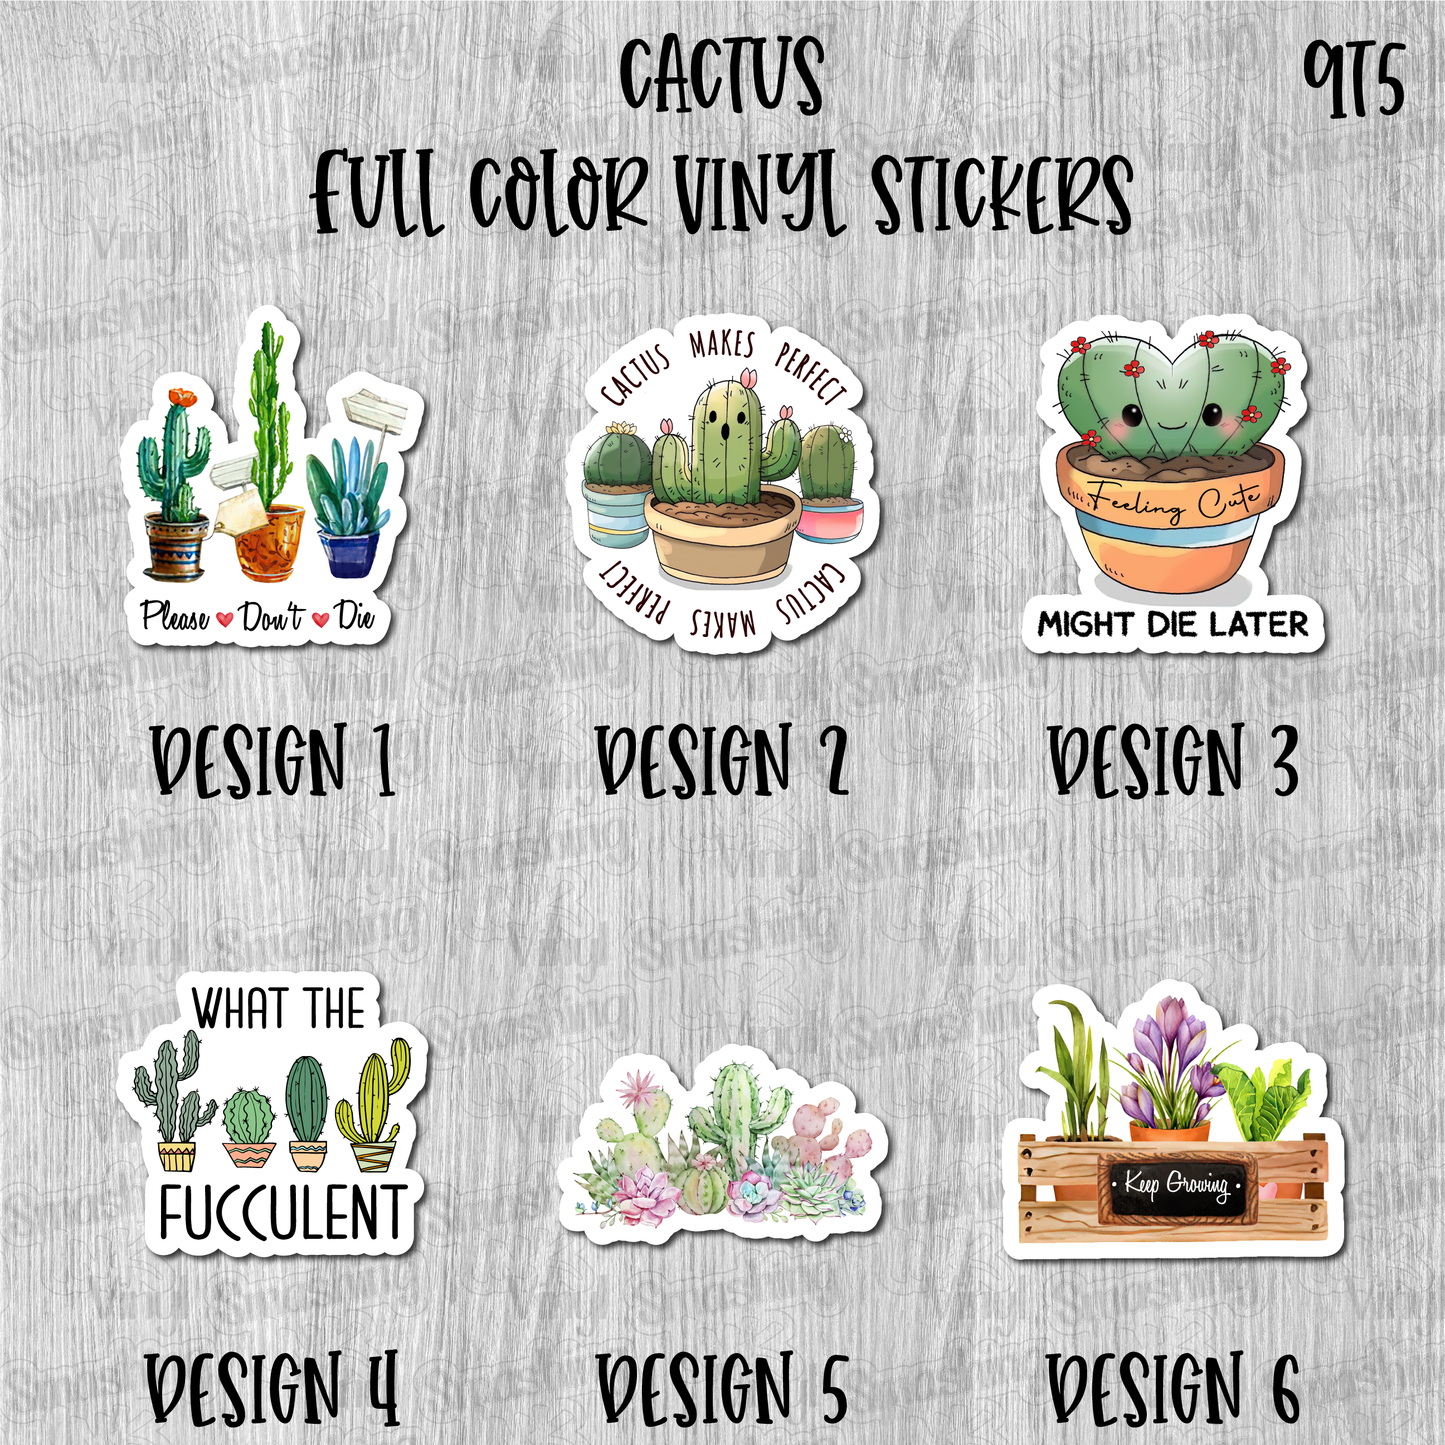 Cactus - Full Color Vinyl Stickers (SHIPS IN 3-7 BUS DAYS)